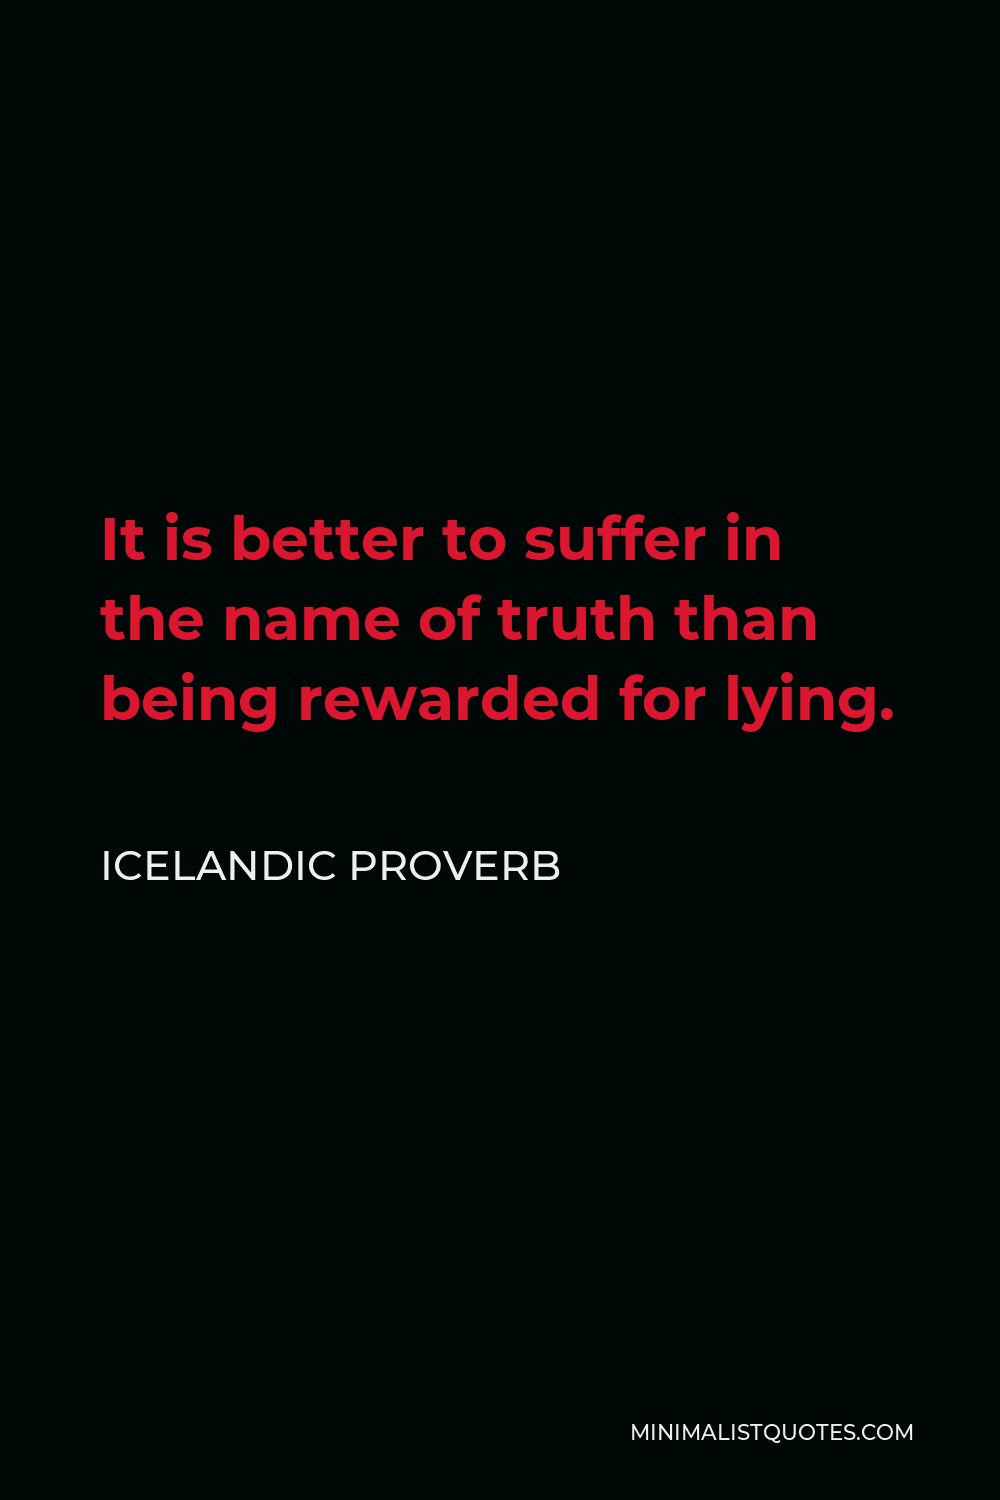 Icelandic Proverb Quote - It is better to suffer in the name of truth than being rewarded for lying.